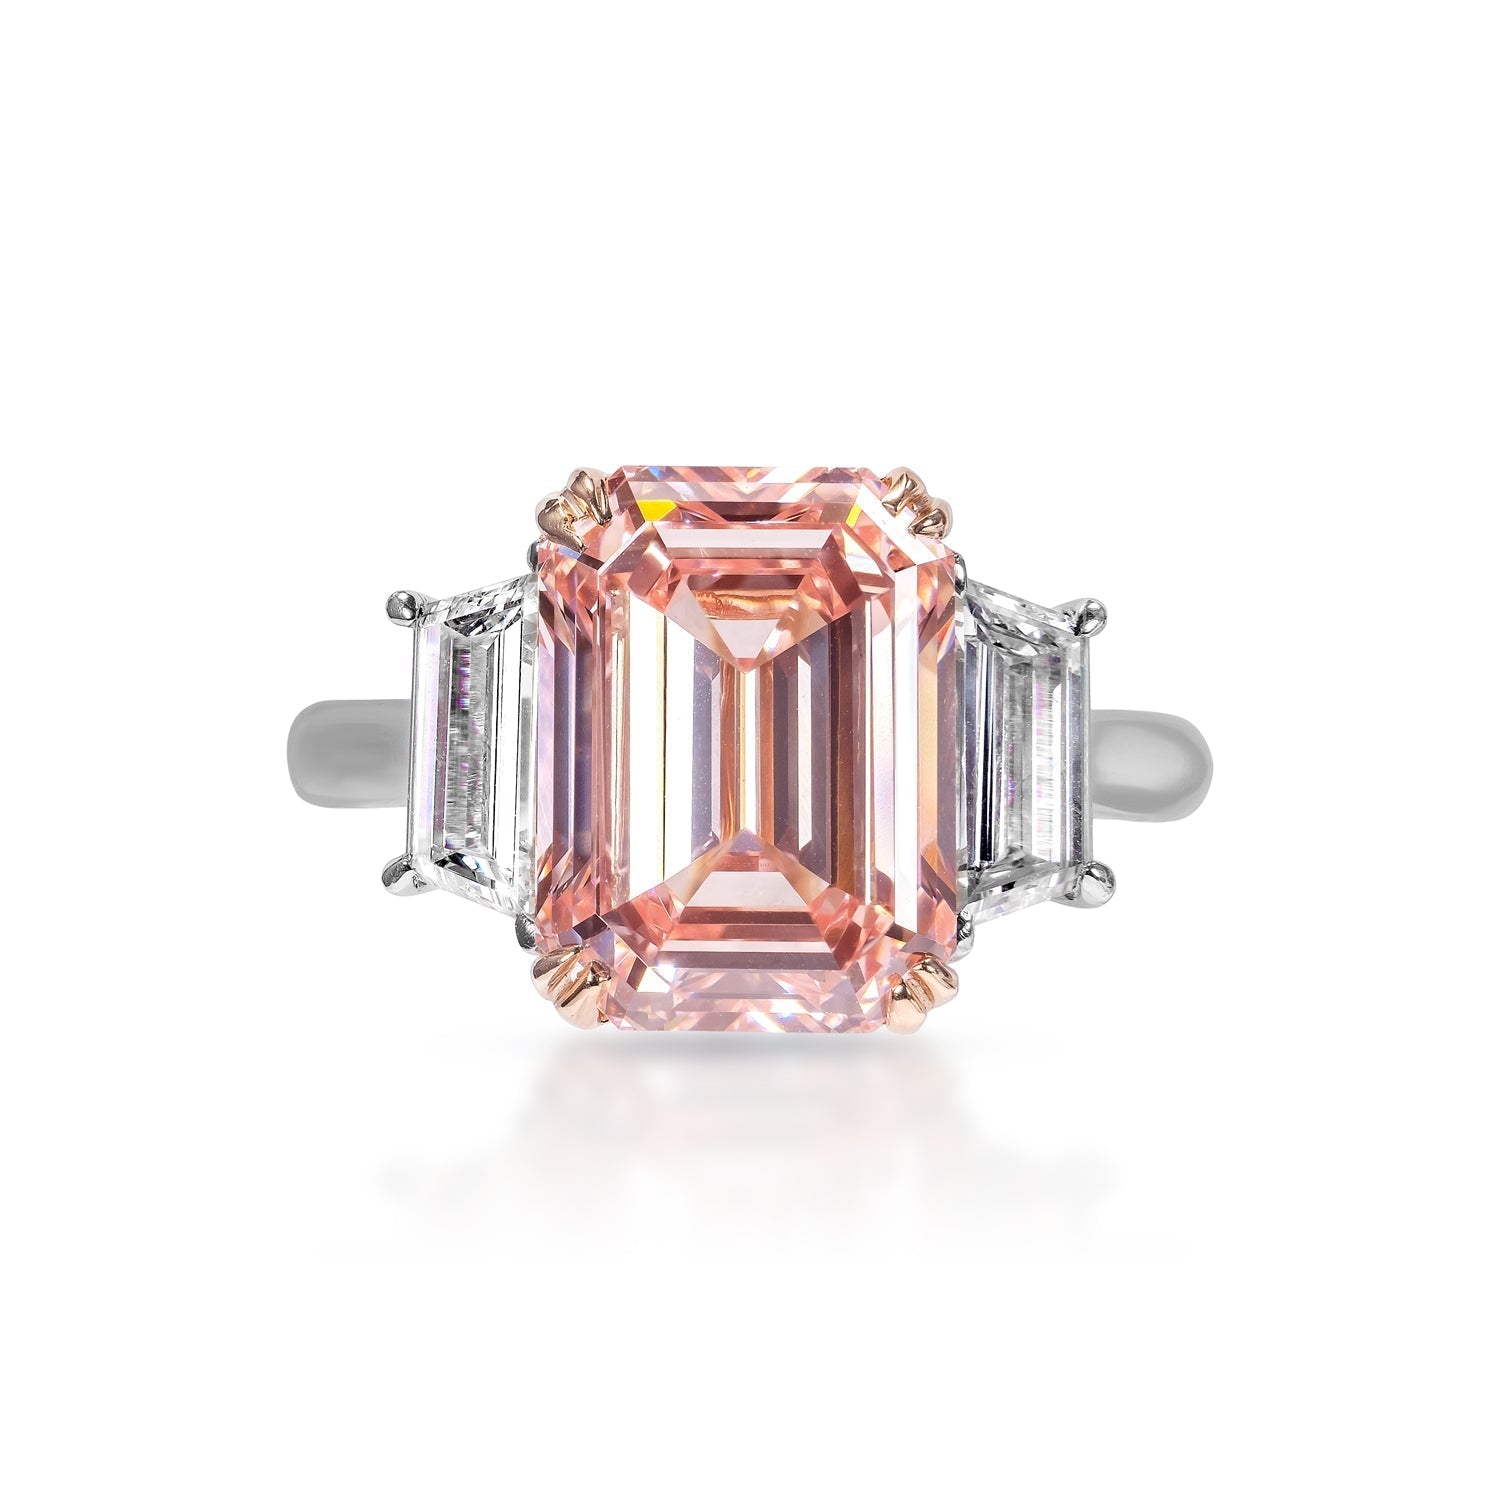 Fancy Vivid Pink Colored Diamond - GIA Certified